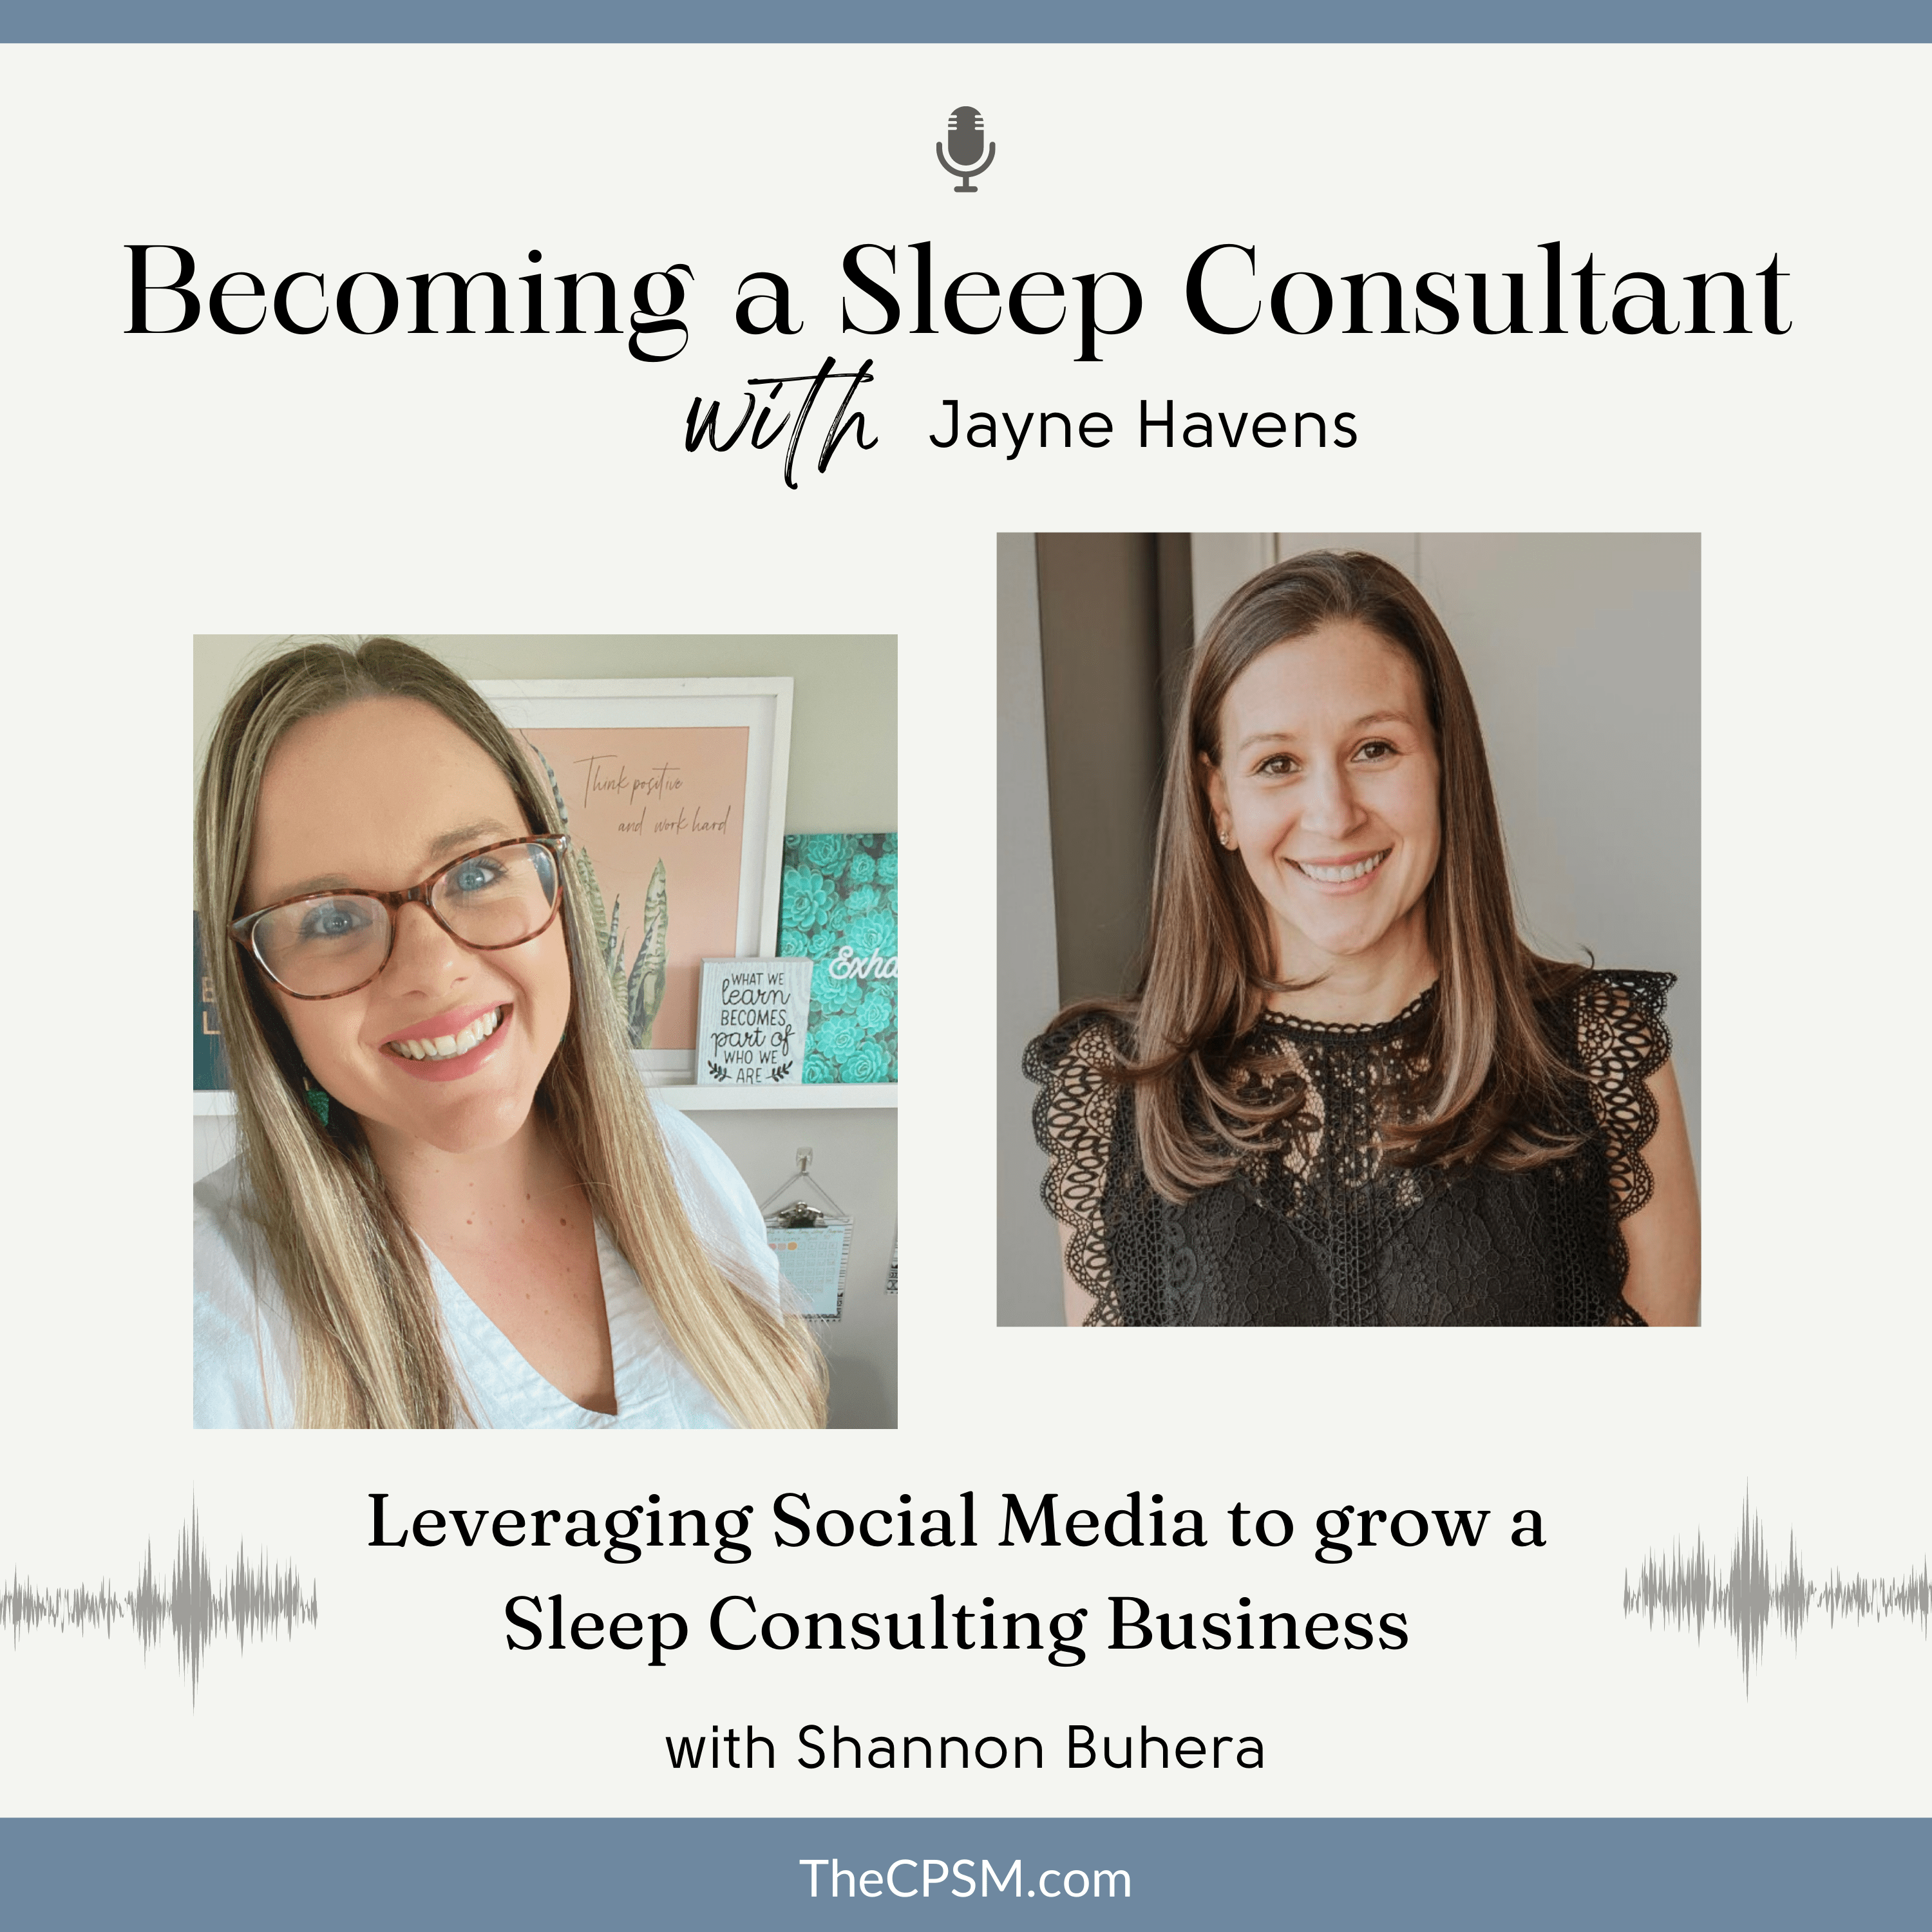 Leveraging Social Media to Grow a Sleep Consulting Business with Shannon Buhera